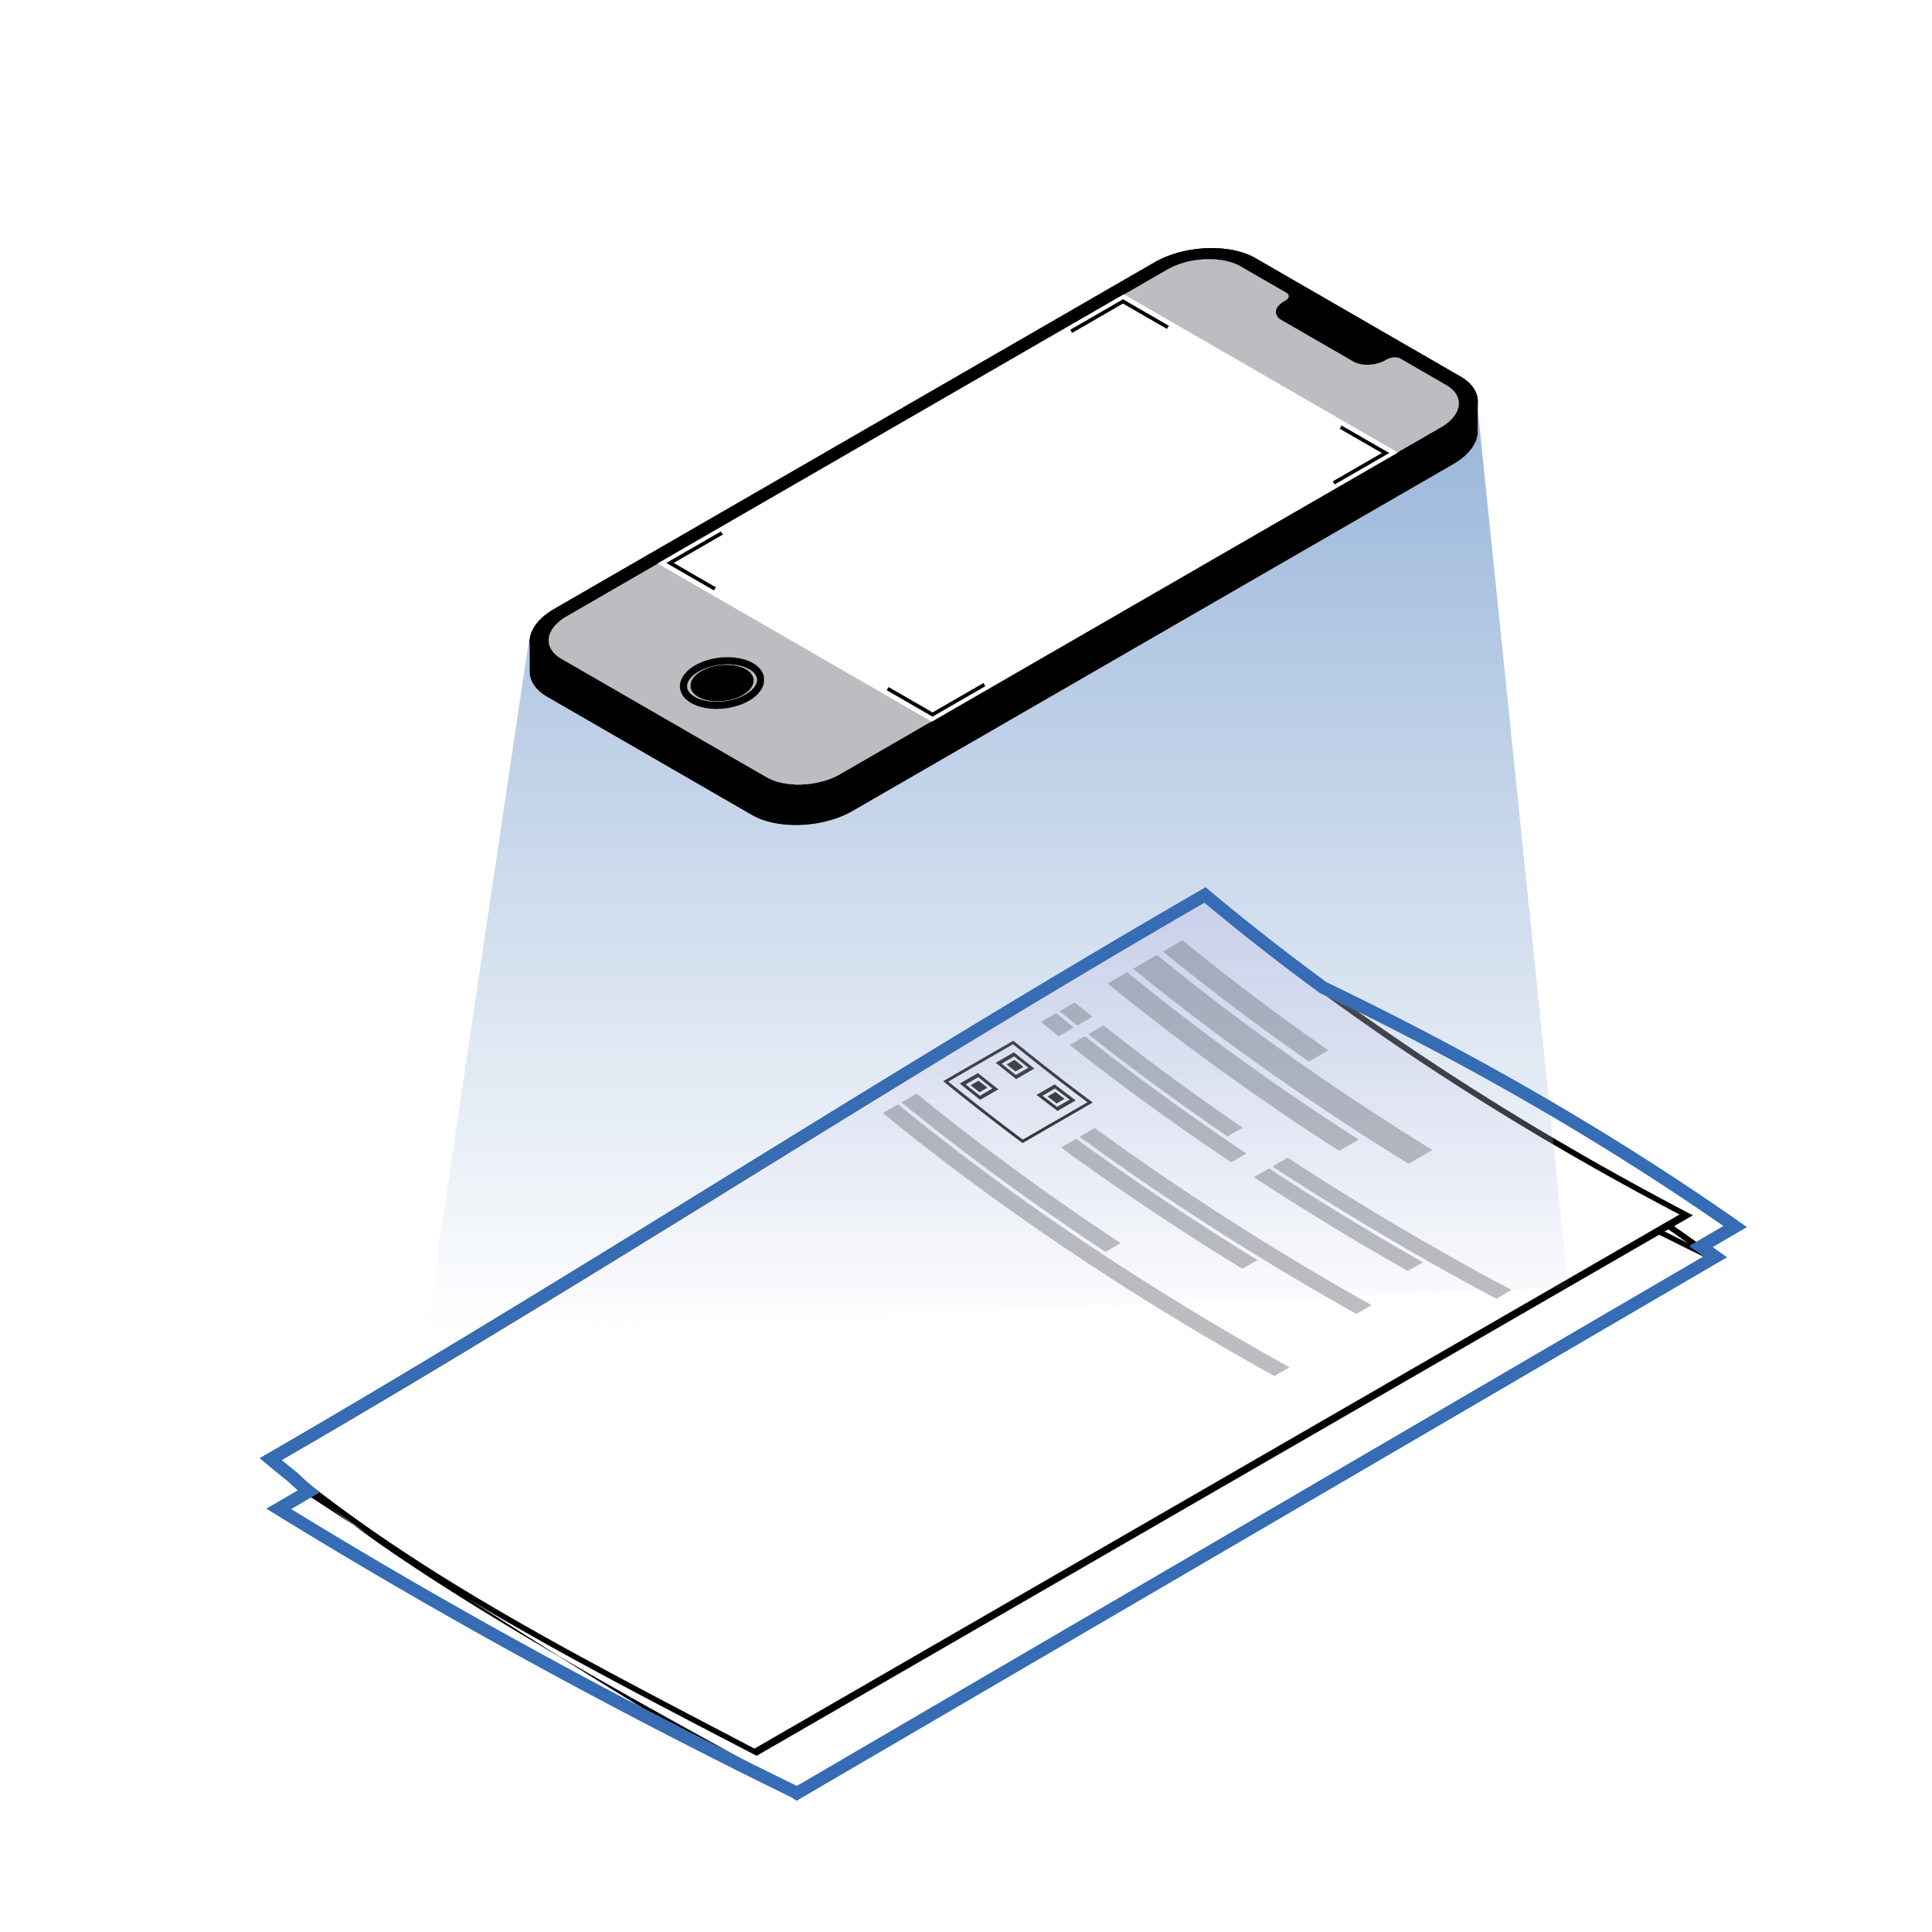 Mobile phone hovering over a folded panel of test instructions.